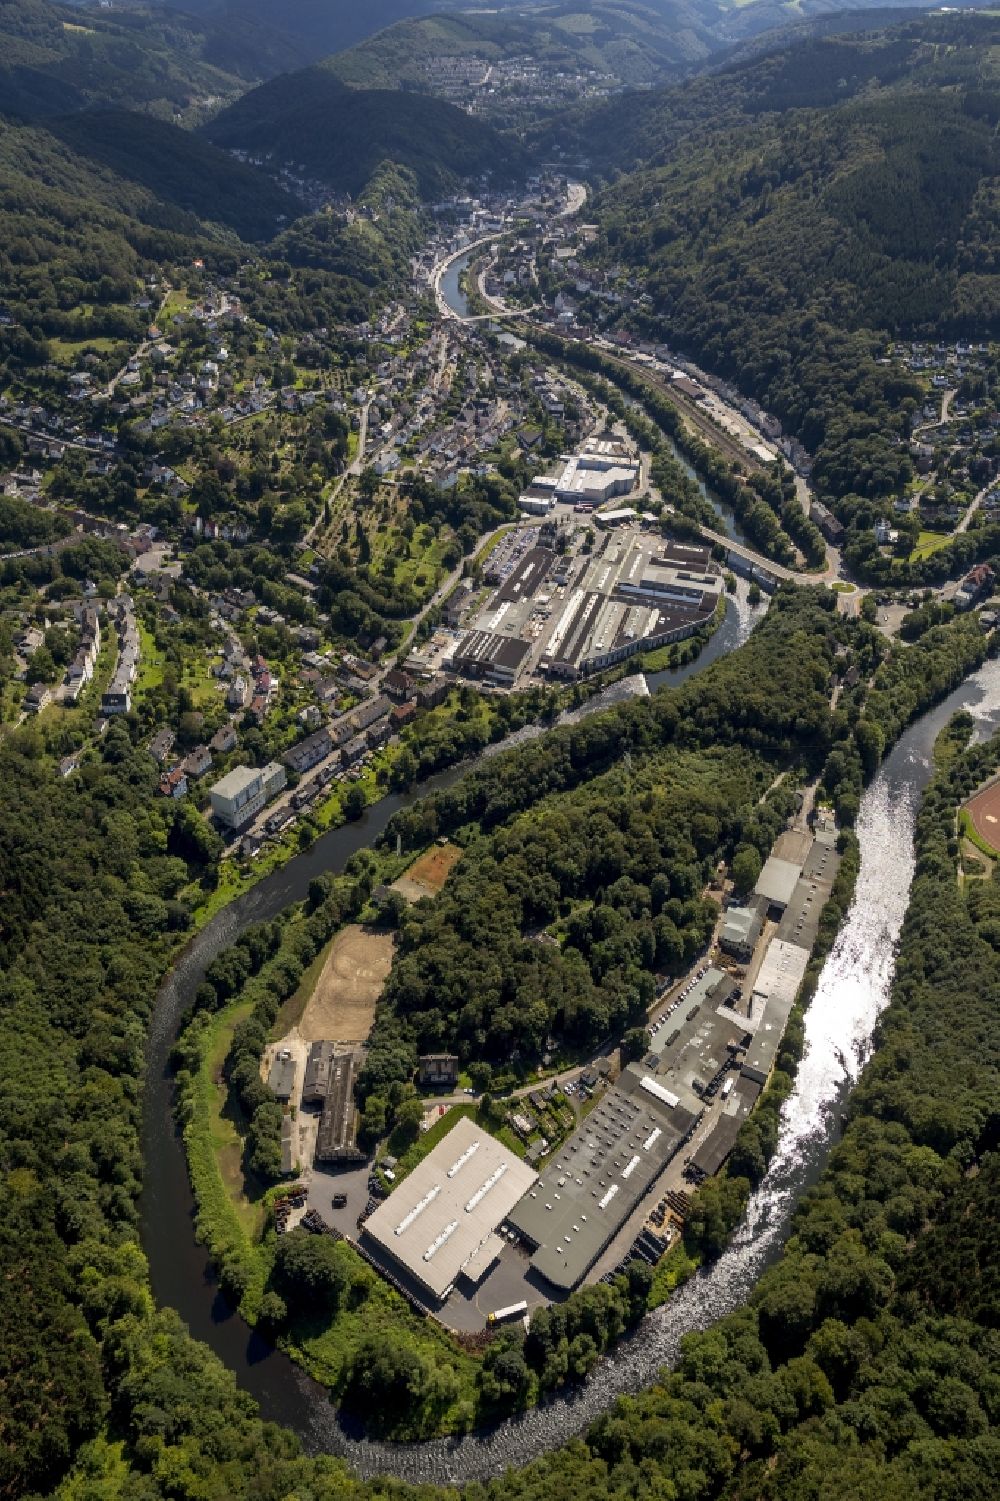 Altena from the bird's eye view: Bight of the river Lenne with a view to a part of the city Altena in the state North Rhine-Westphalia. The river loop creates a peninsula on which several industrial buildings are located along the path Am Huenengraben